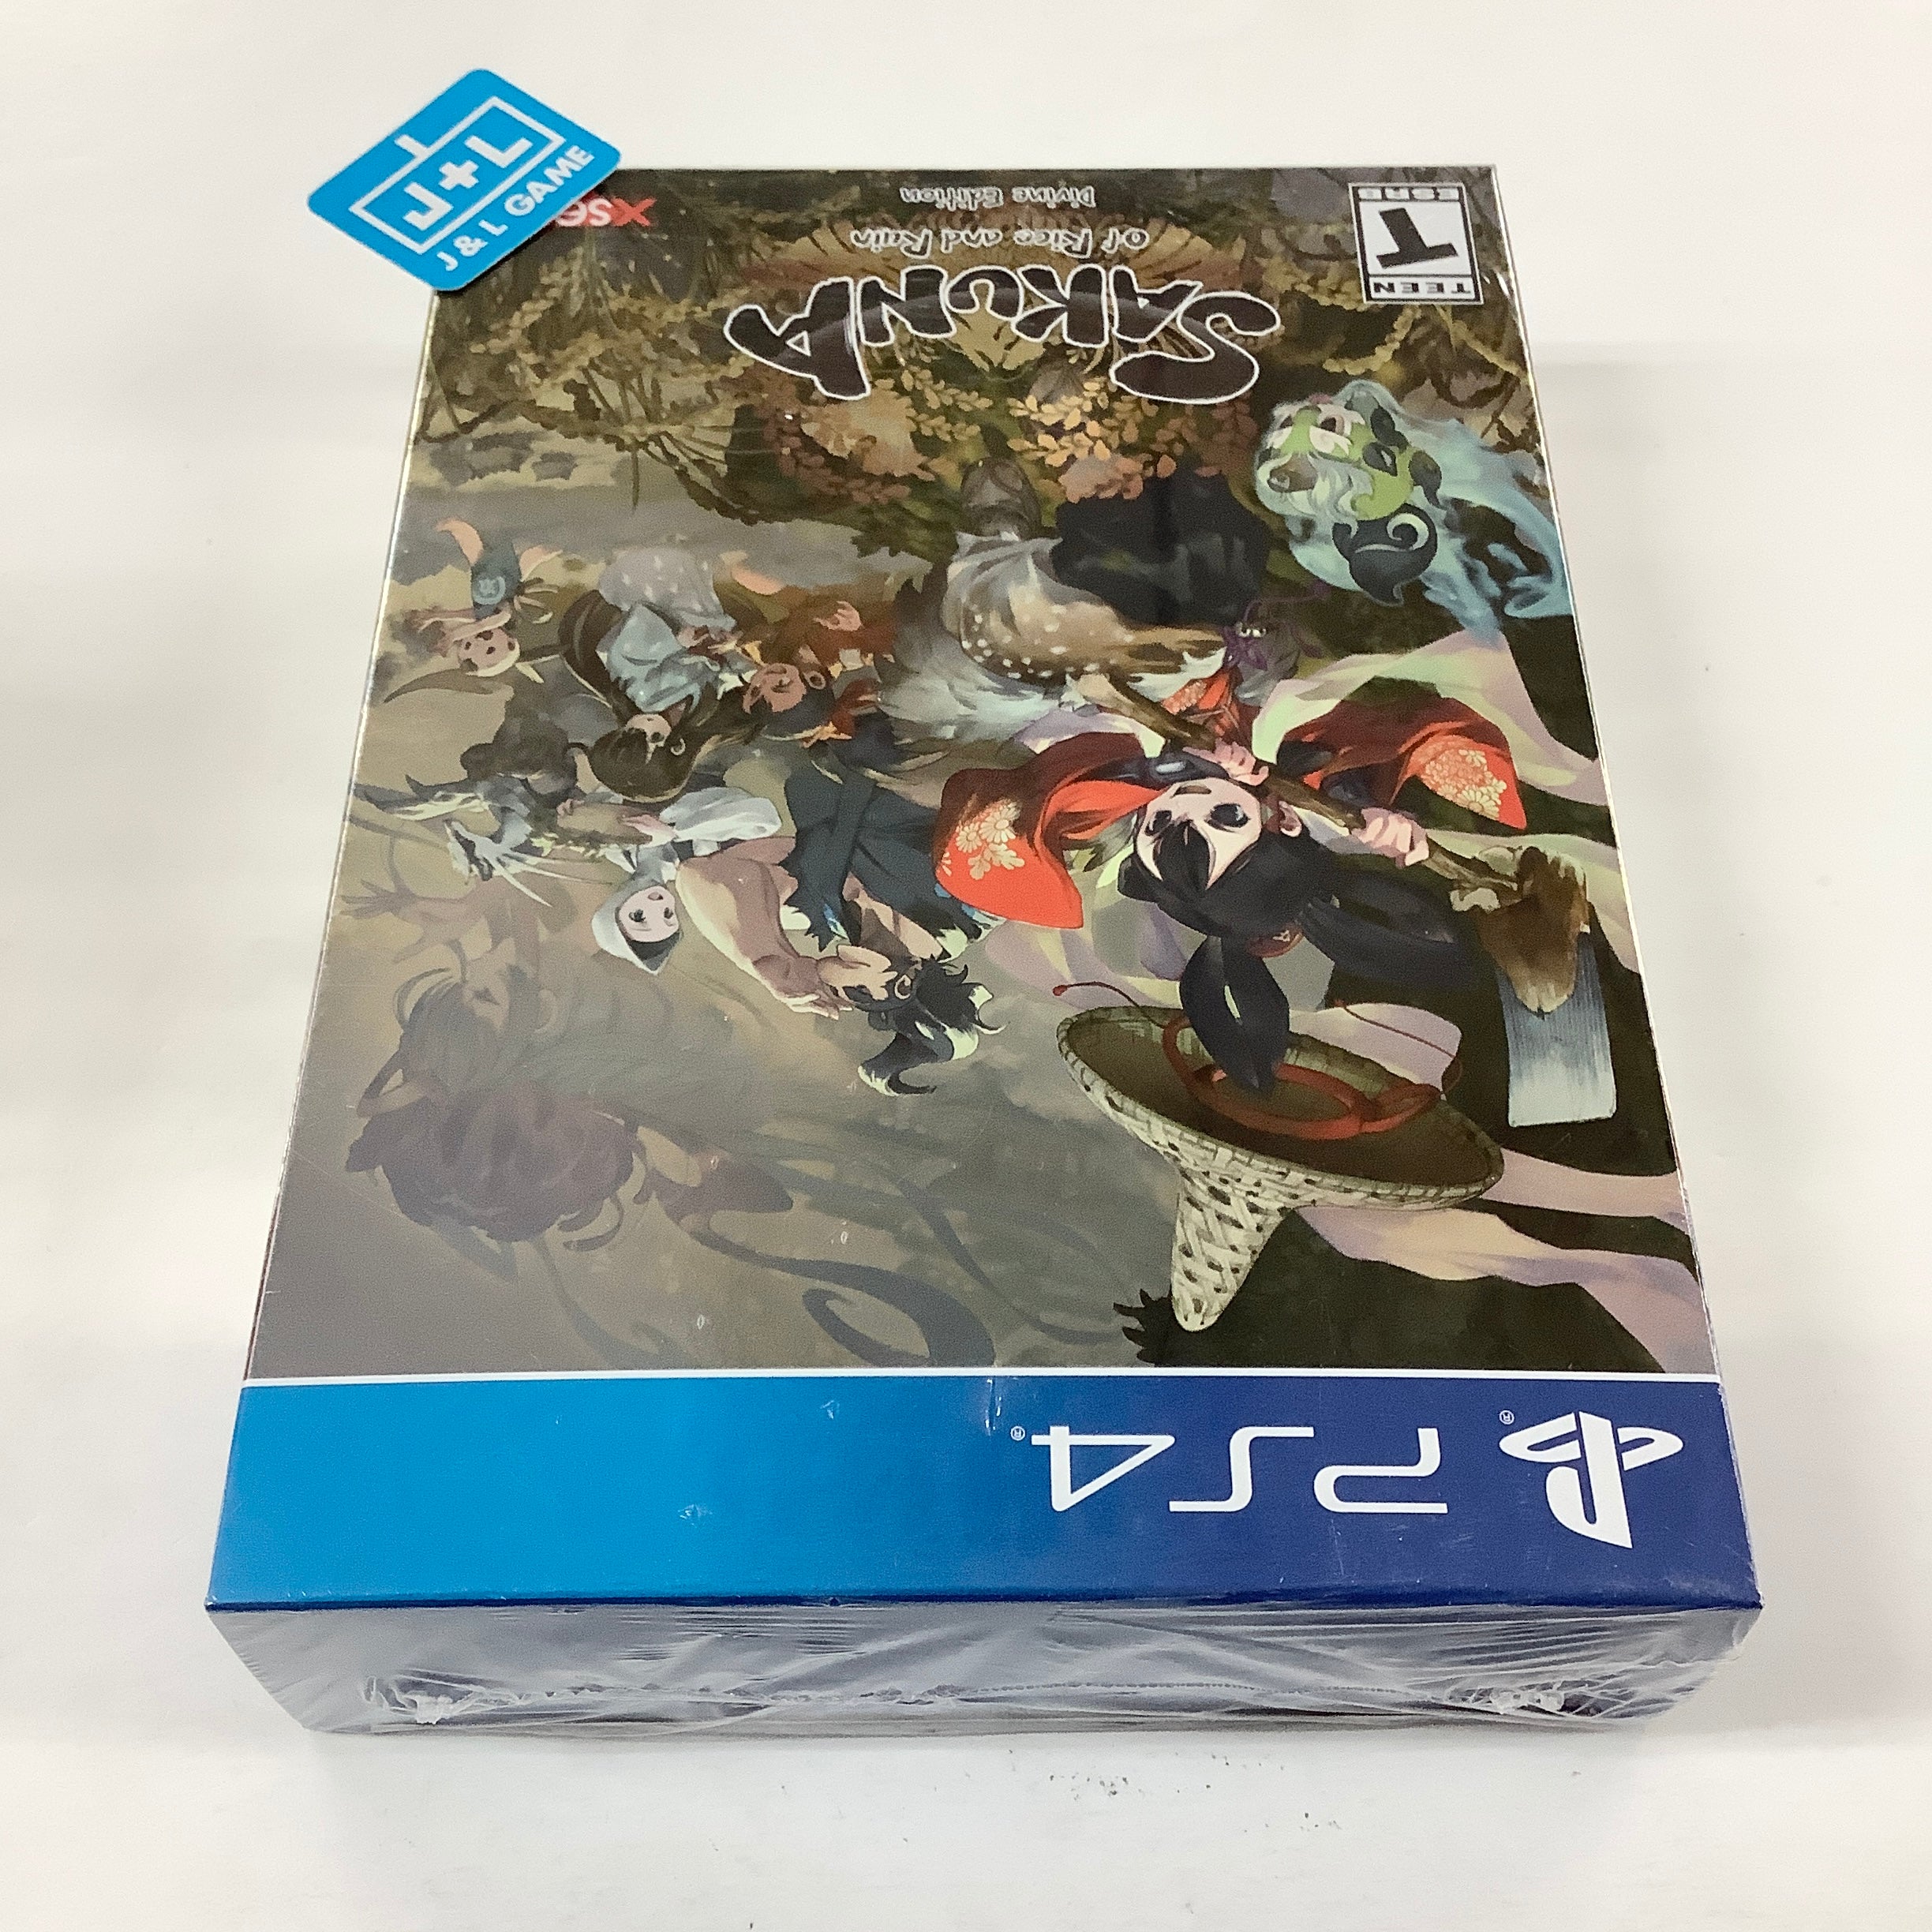 Sakuna: of Rice and Ruin Divine Edition - (PS4) PlayStation 4 Video Games Xseed   